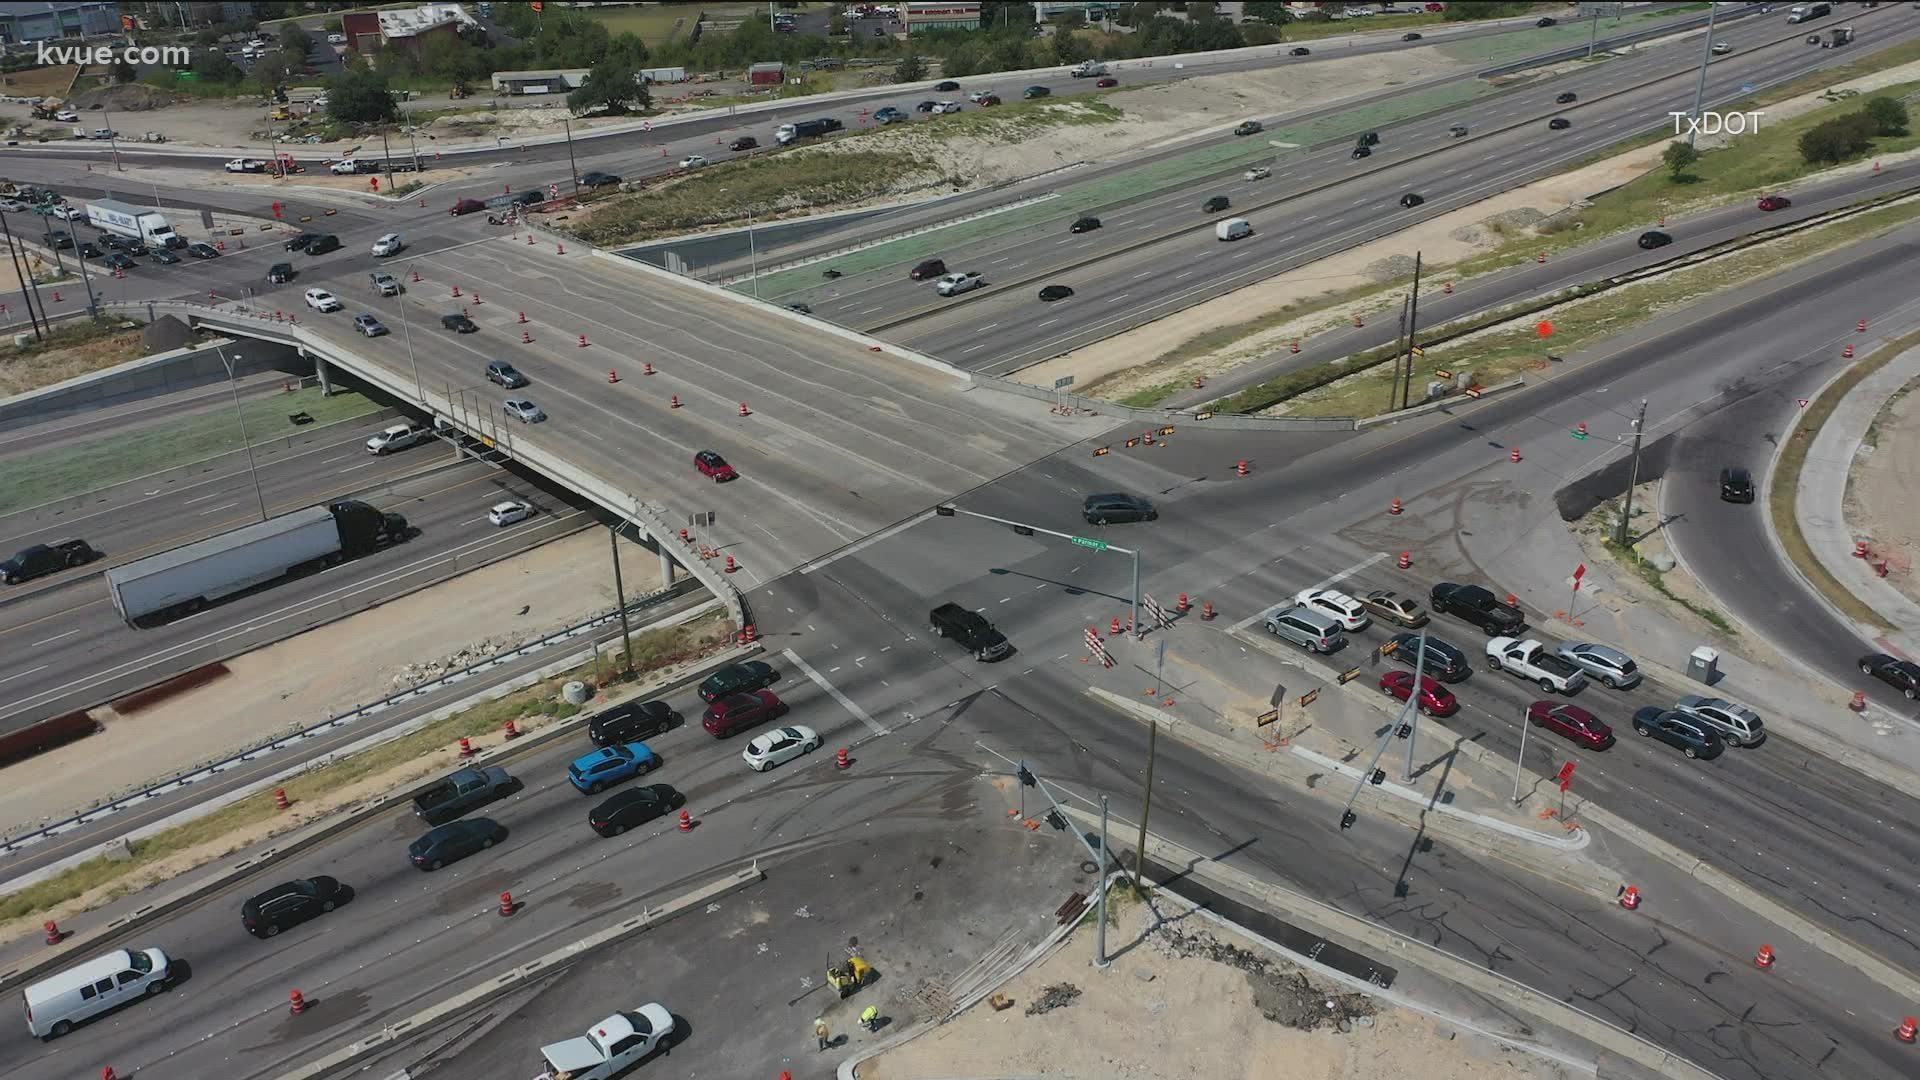 A traffic headache in North Austin may soon be relieved with the opening of a new intersection. The intersection is located at Interstate 35 and Parmer Lane.